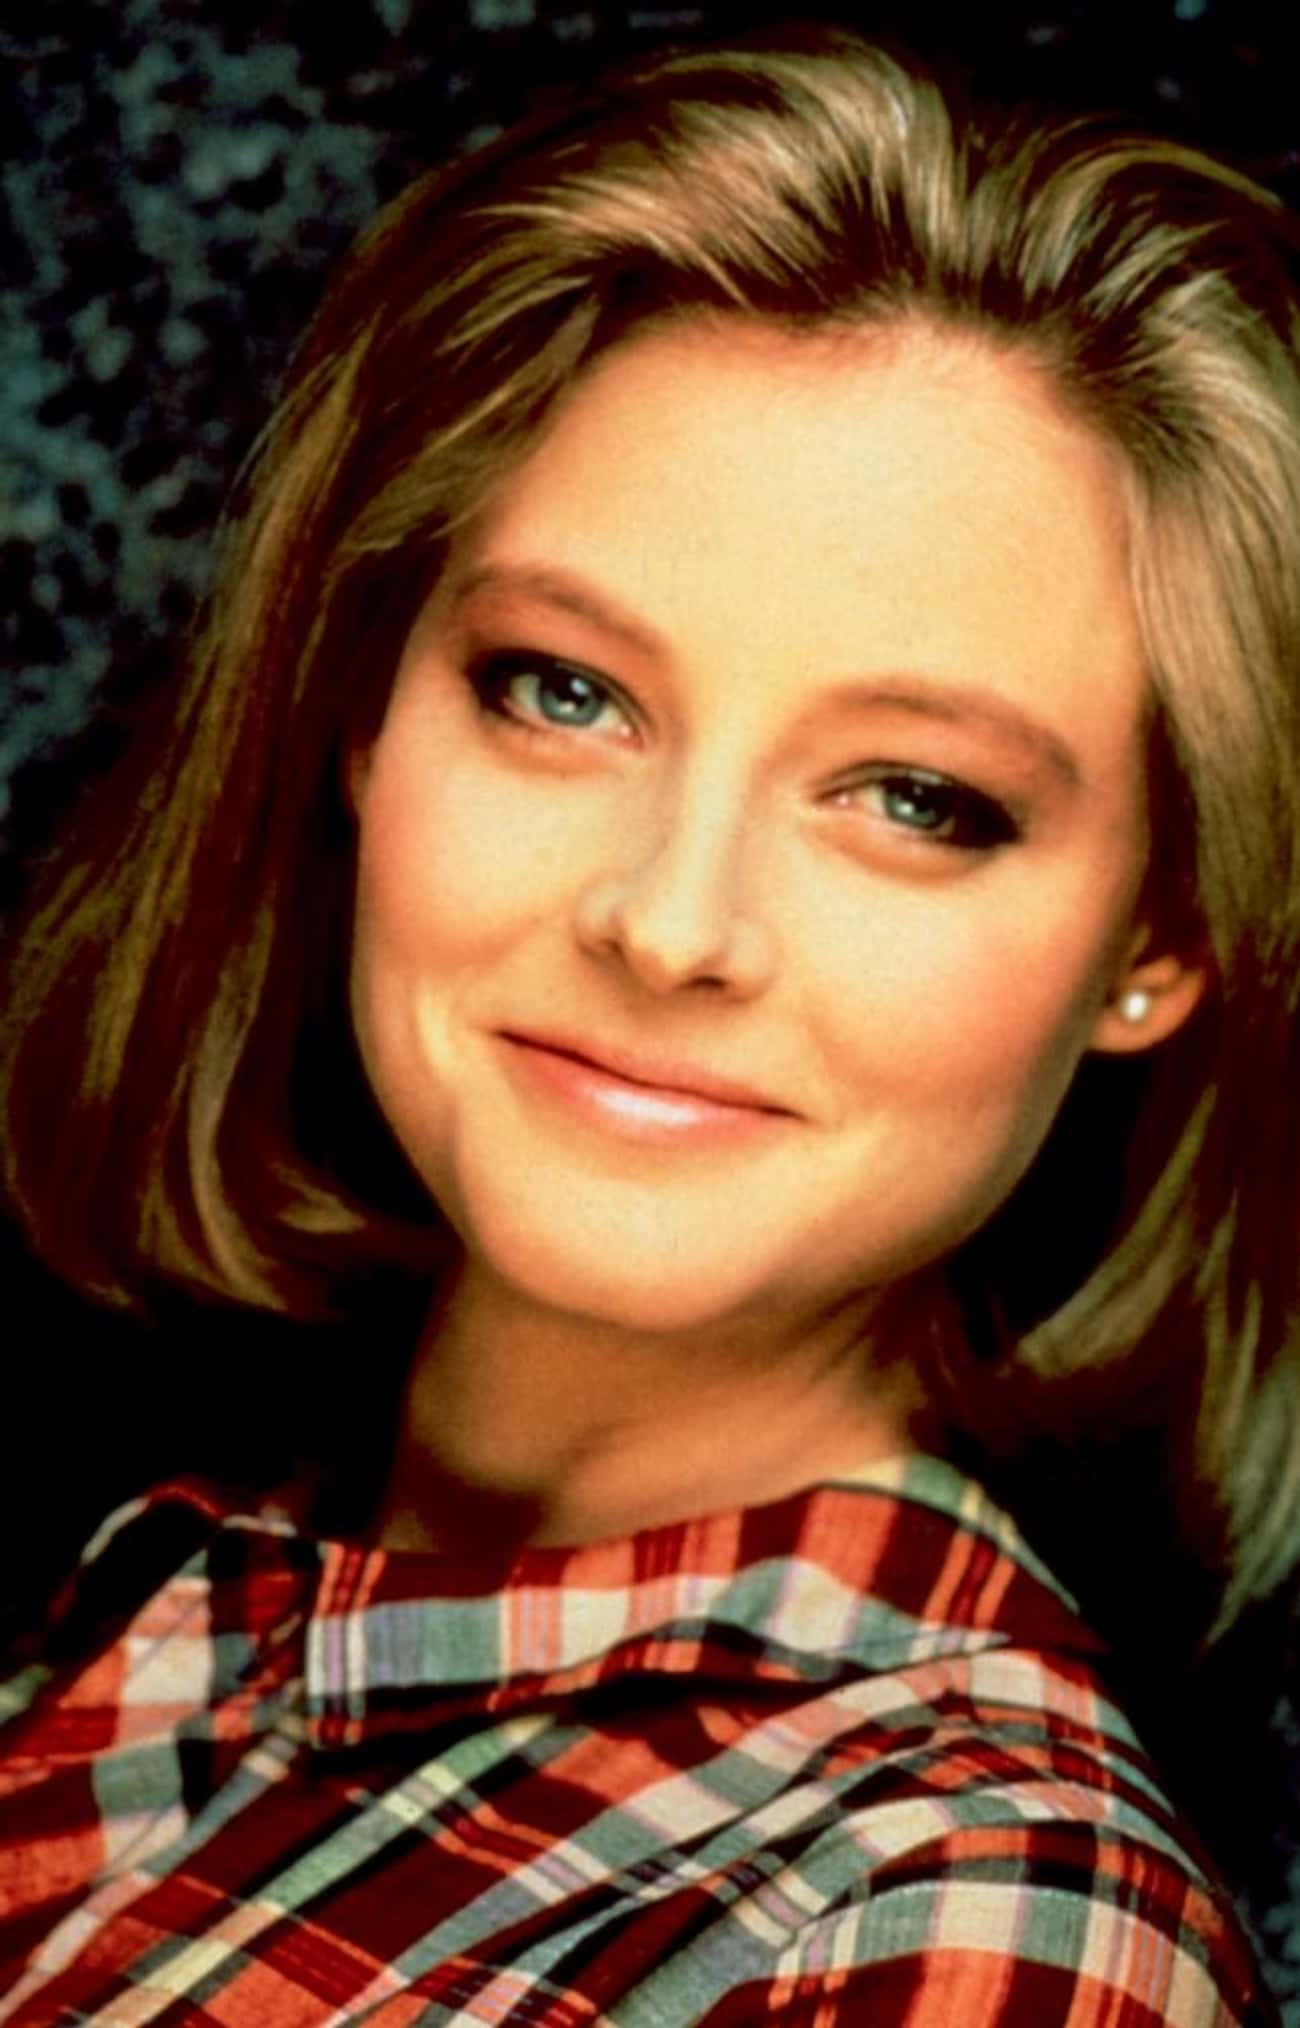 Young Jodie Foster in Checkered Buttondown Shirt